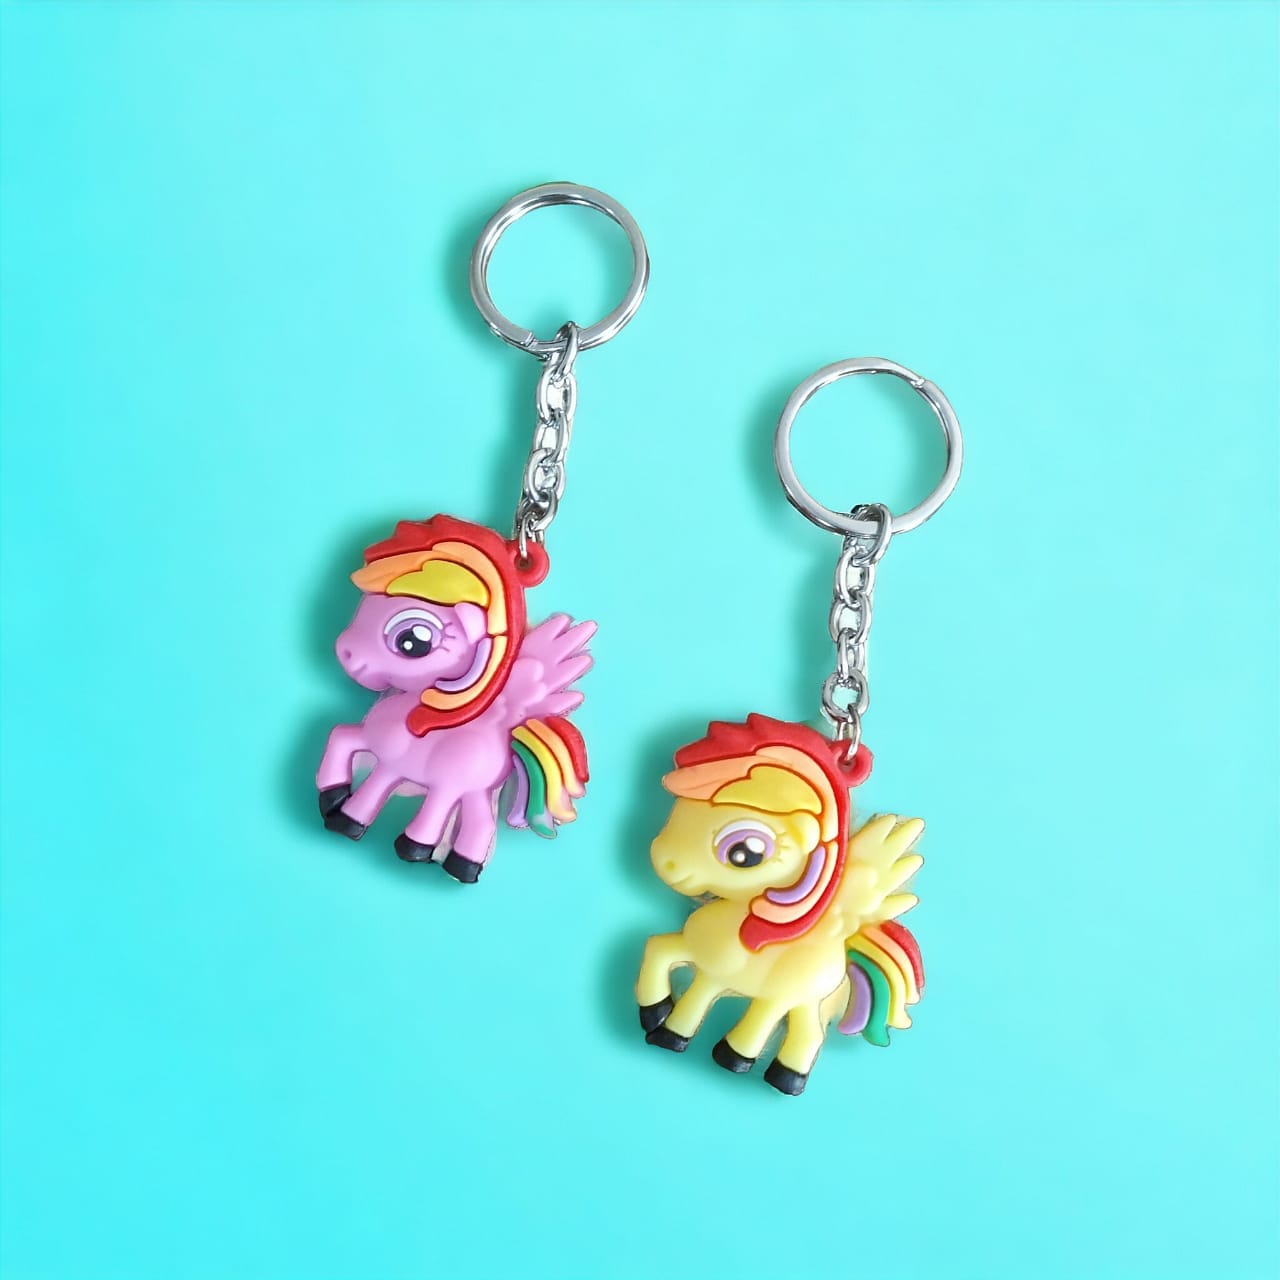 Shakti Keychain Keychains & Fridge magnets BLUE Unicorn Keychain Set of 2 - Adorable Accessories for Your Keys and Bags